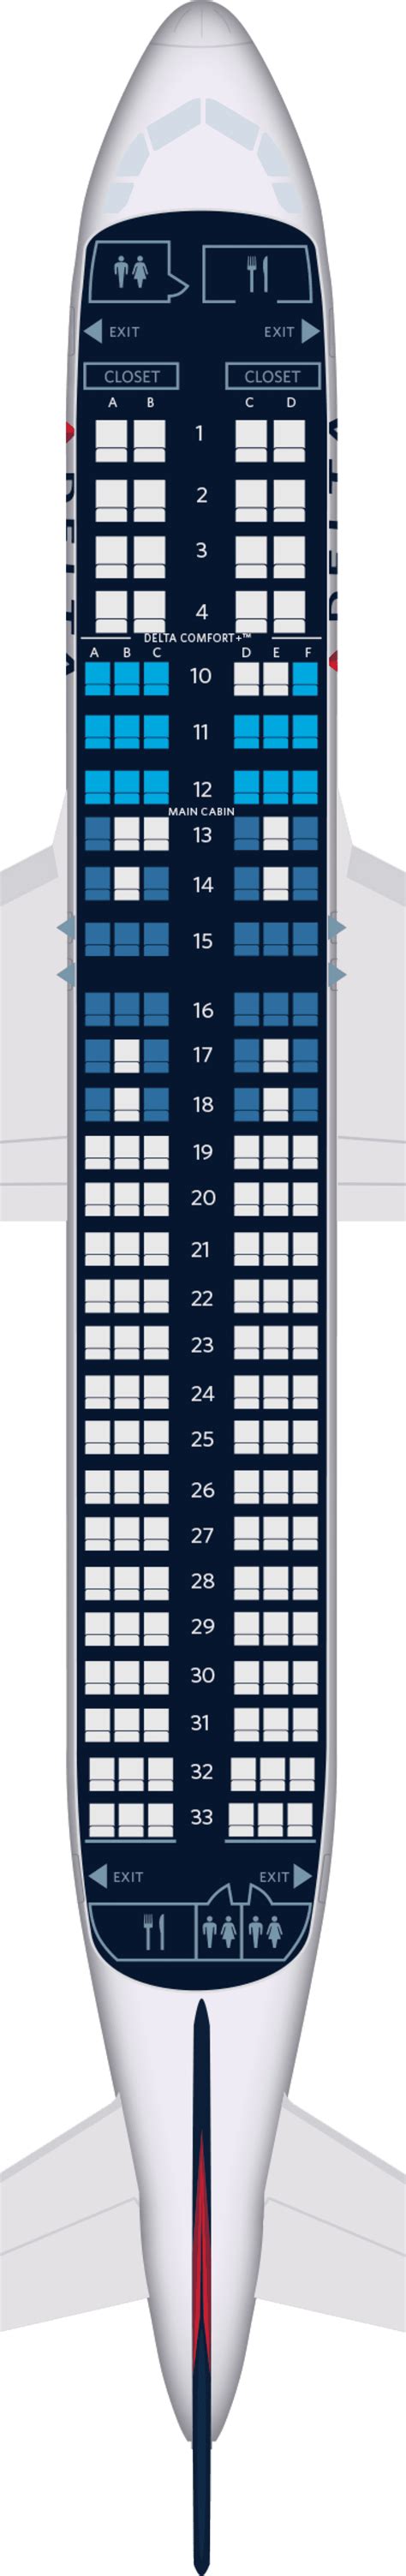 Airbus A320 Aircraft Seat Maps Specs And Amenities